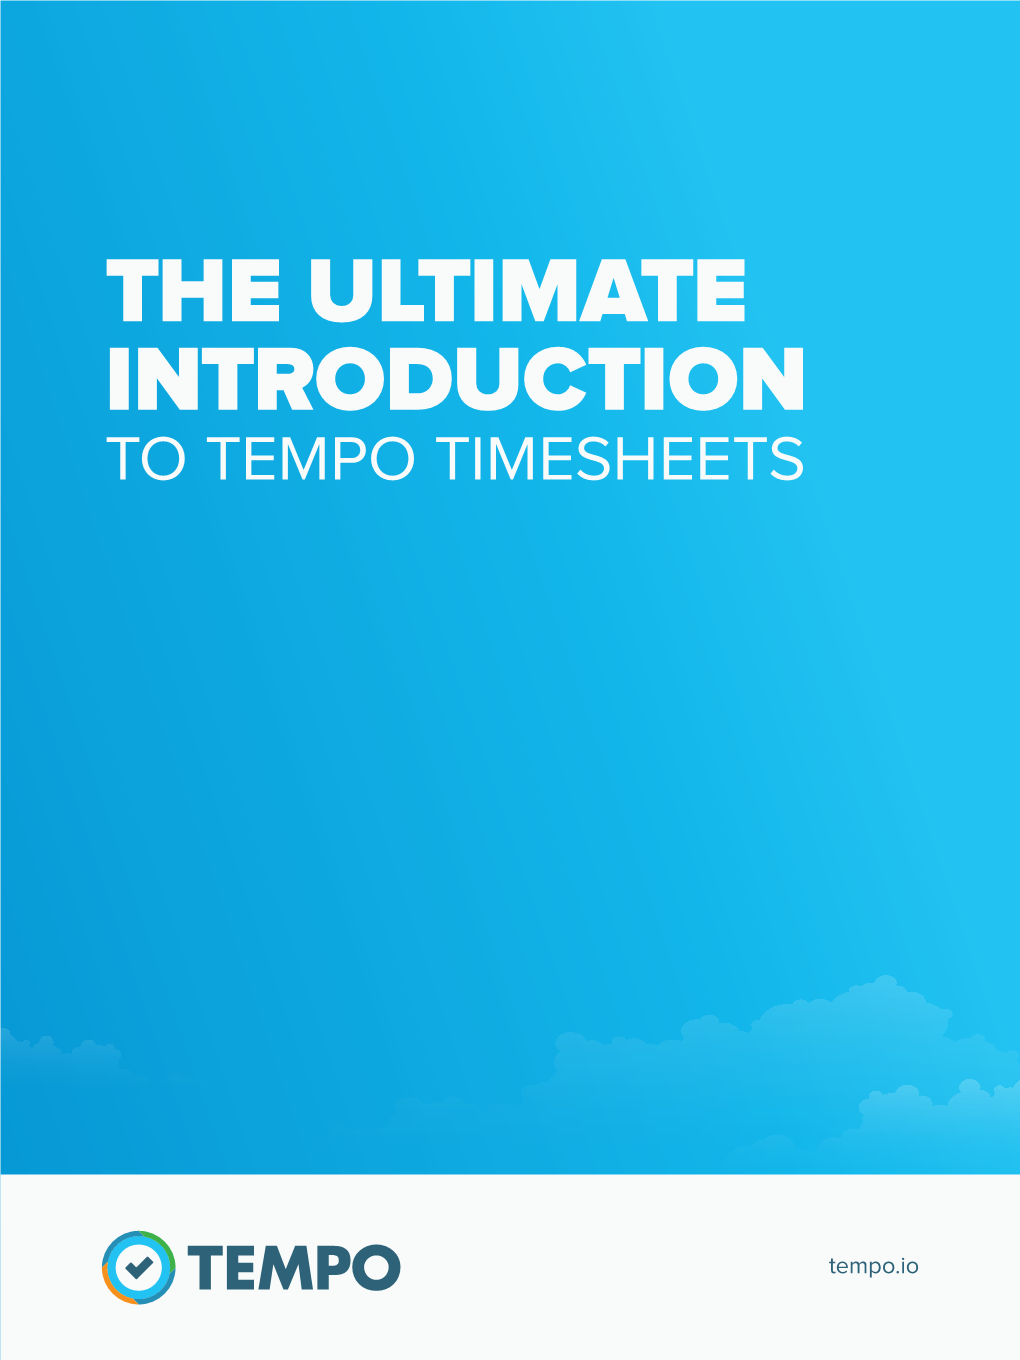 Are You Thinking of Using Tempo Timesheets? If You’Re Interested in Tracking Time in Jira, You’Re in the Right Place